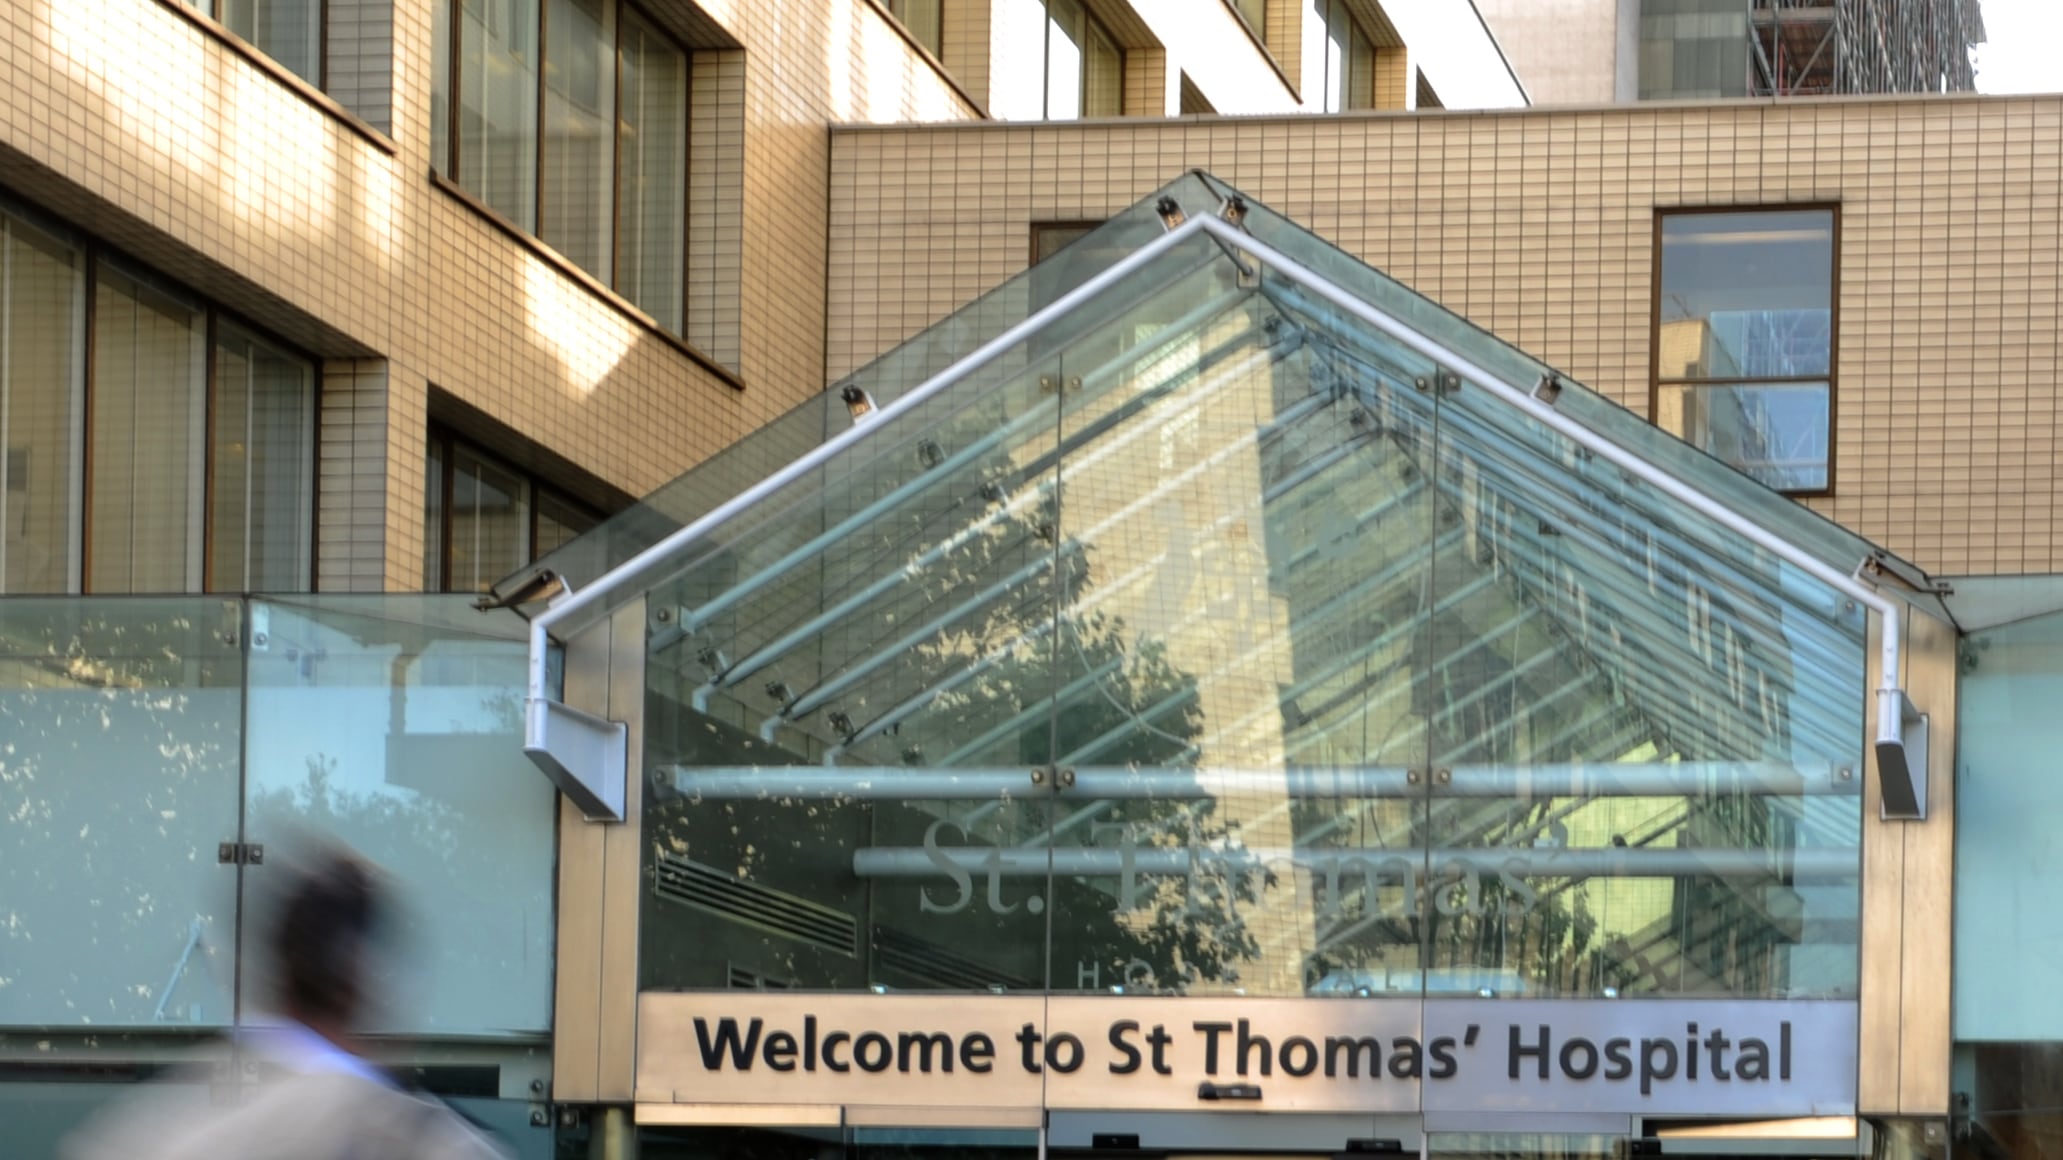 Guy’s and St Thomas’ Hospital is among those affected by the cyber attack